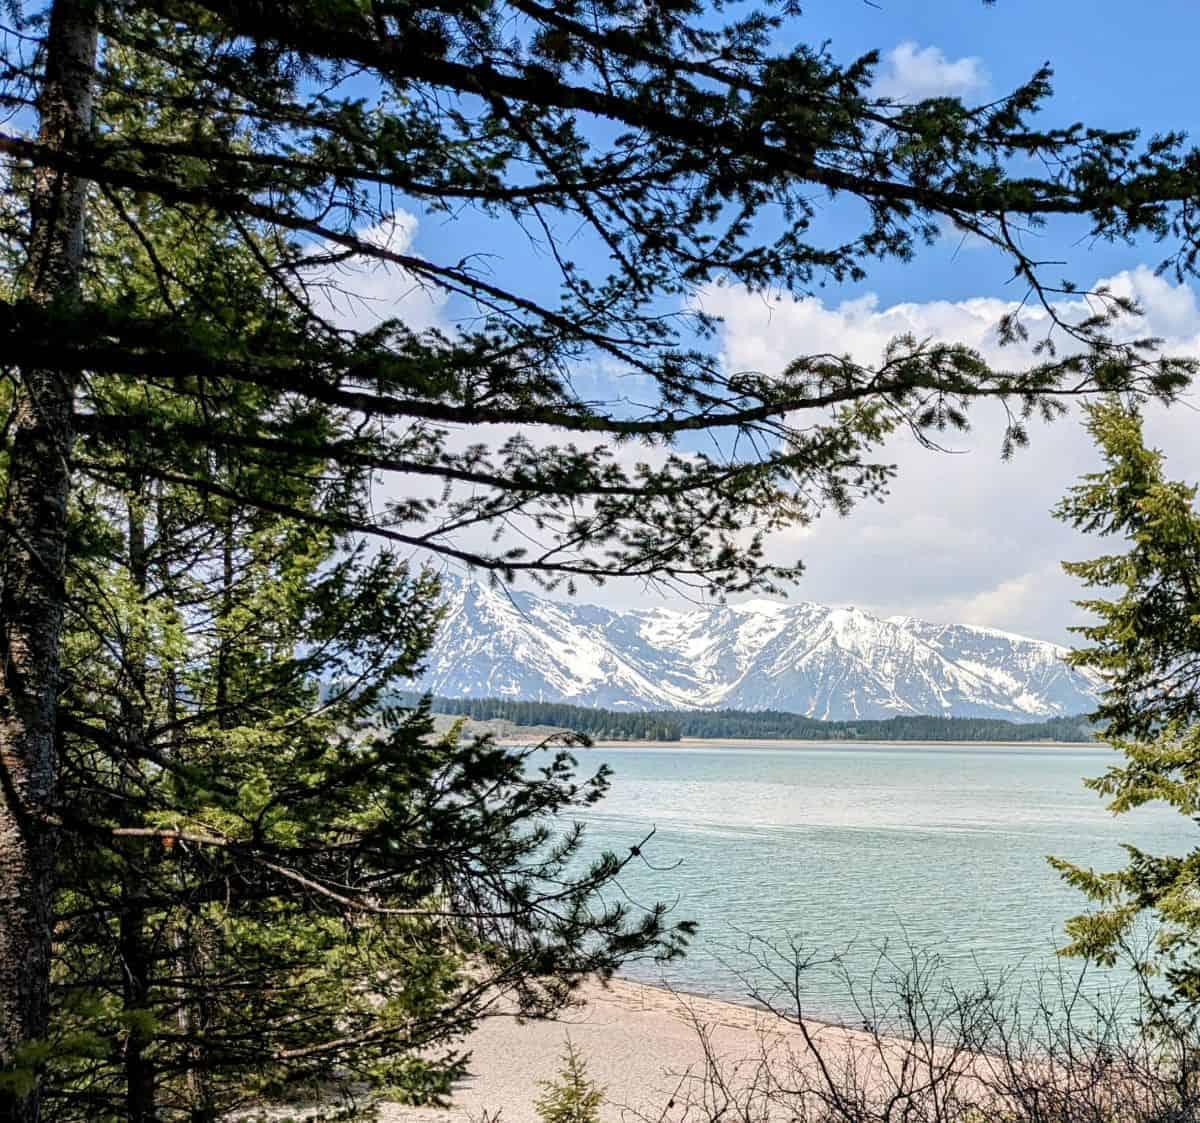 view of Jackson Lake with the Teton Range beyond, framed by evergreen trees